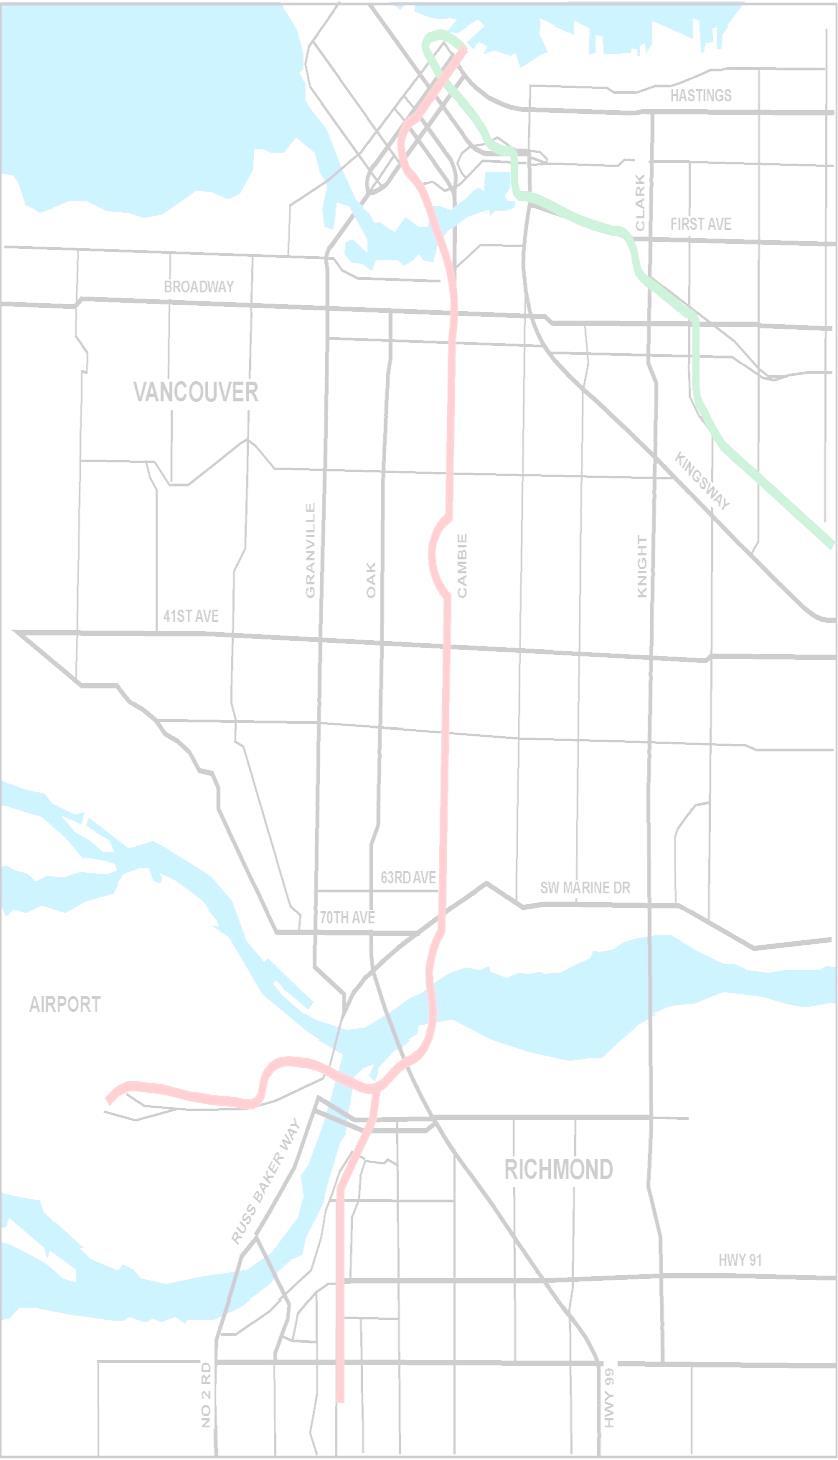 Project Context The Canada Line The Canada Line is the first air-rail link in Canada Automated light rail rapid transit system linking downtown Vancouver with both Richmond and Vancouver